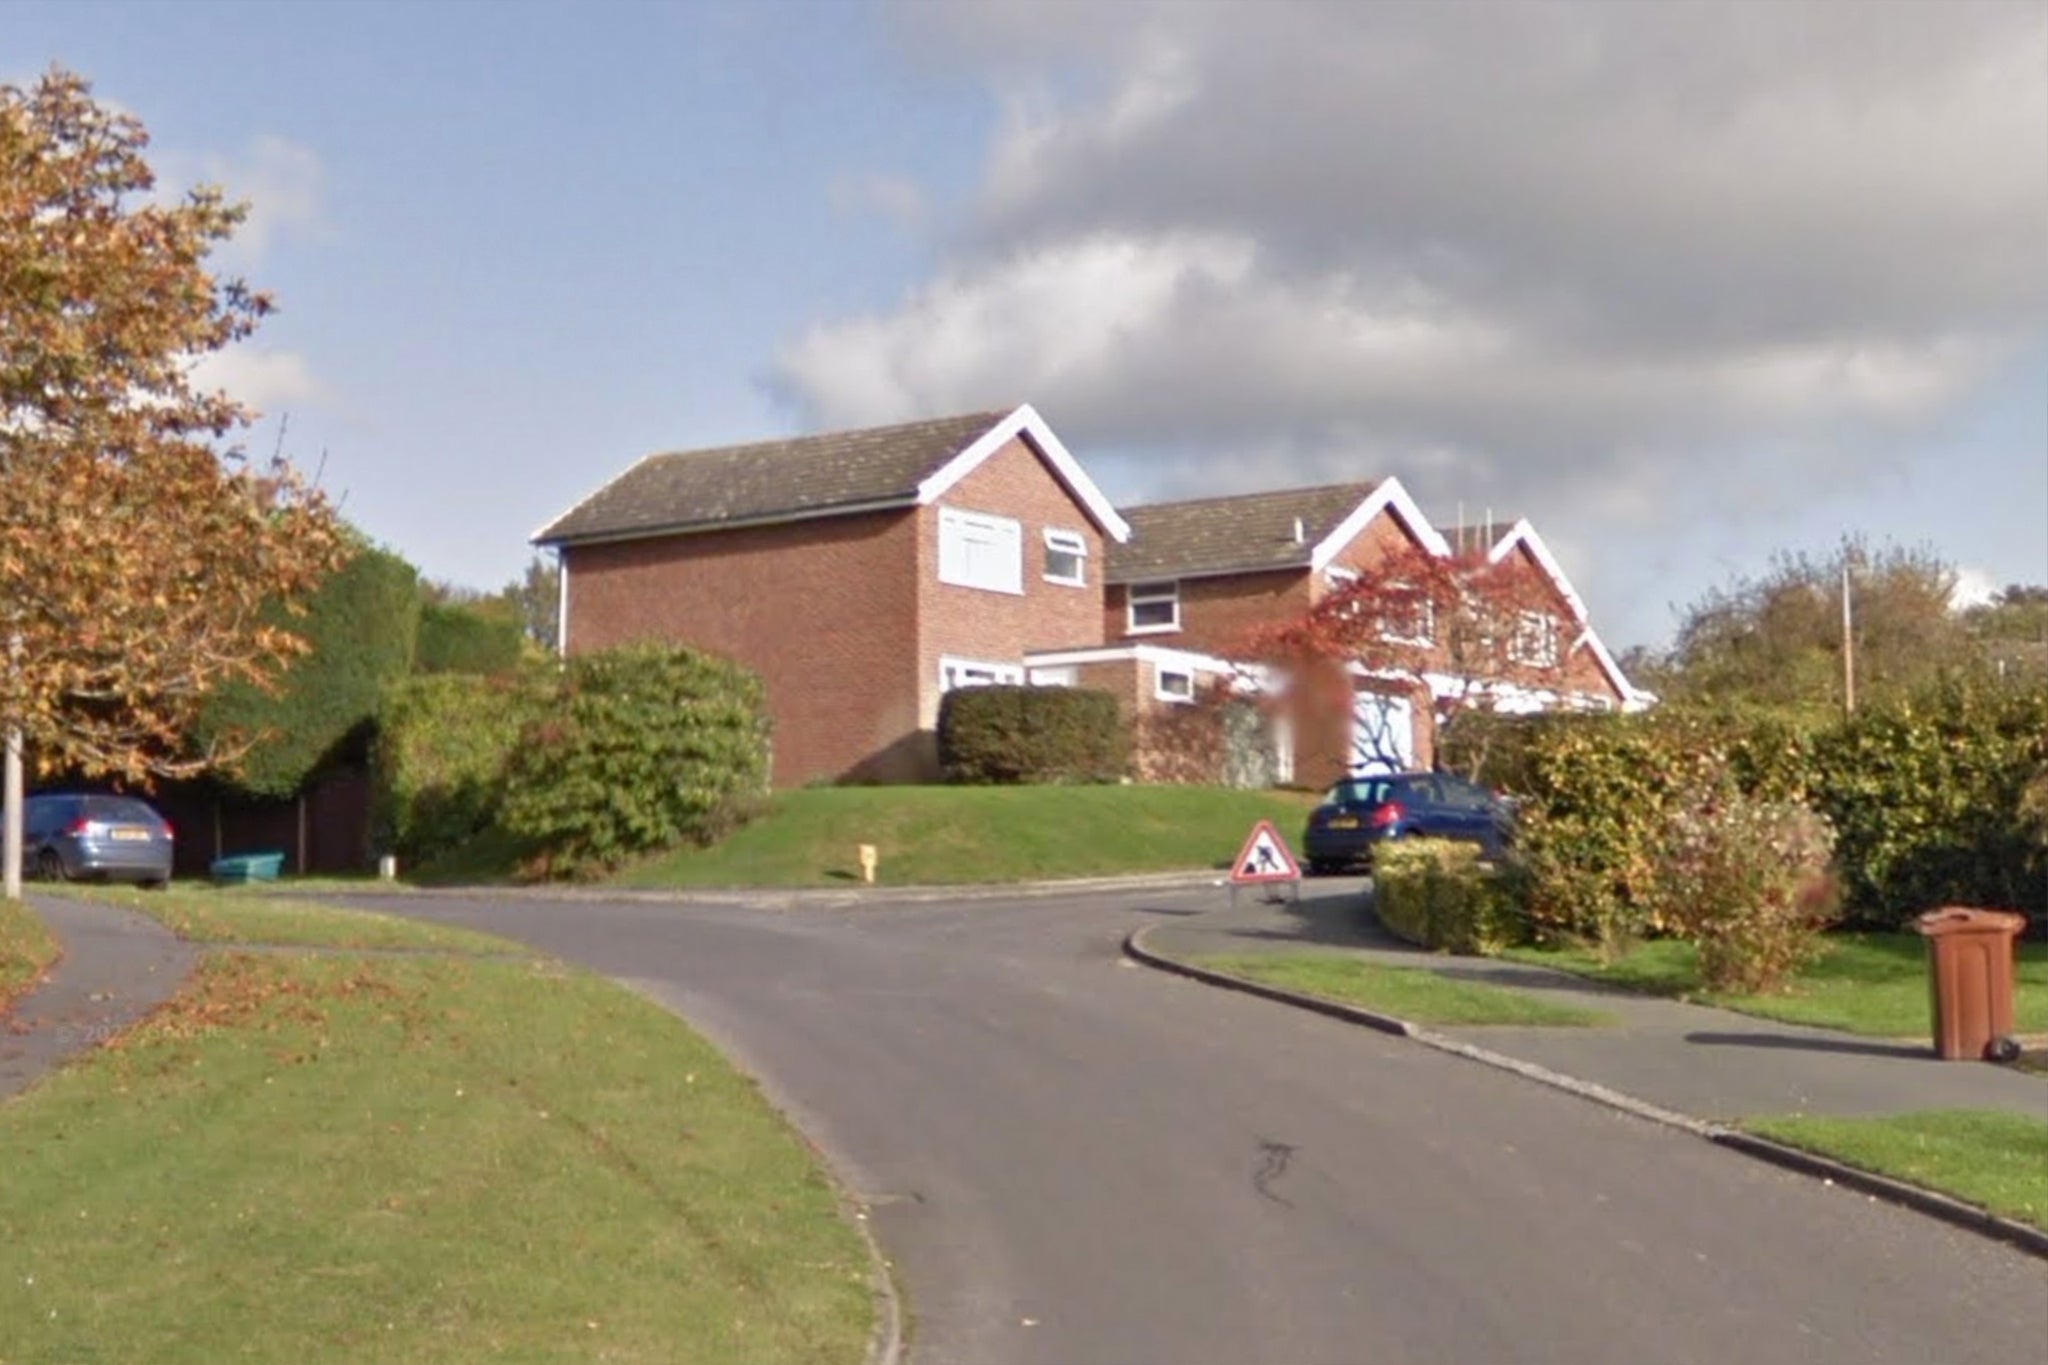 Sussex Police were called to the incident in Hunters Way in Uckfield on Thursday morning